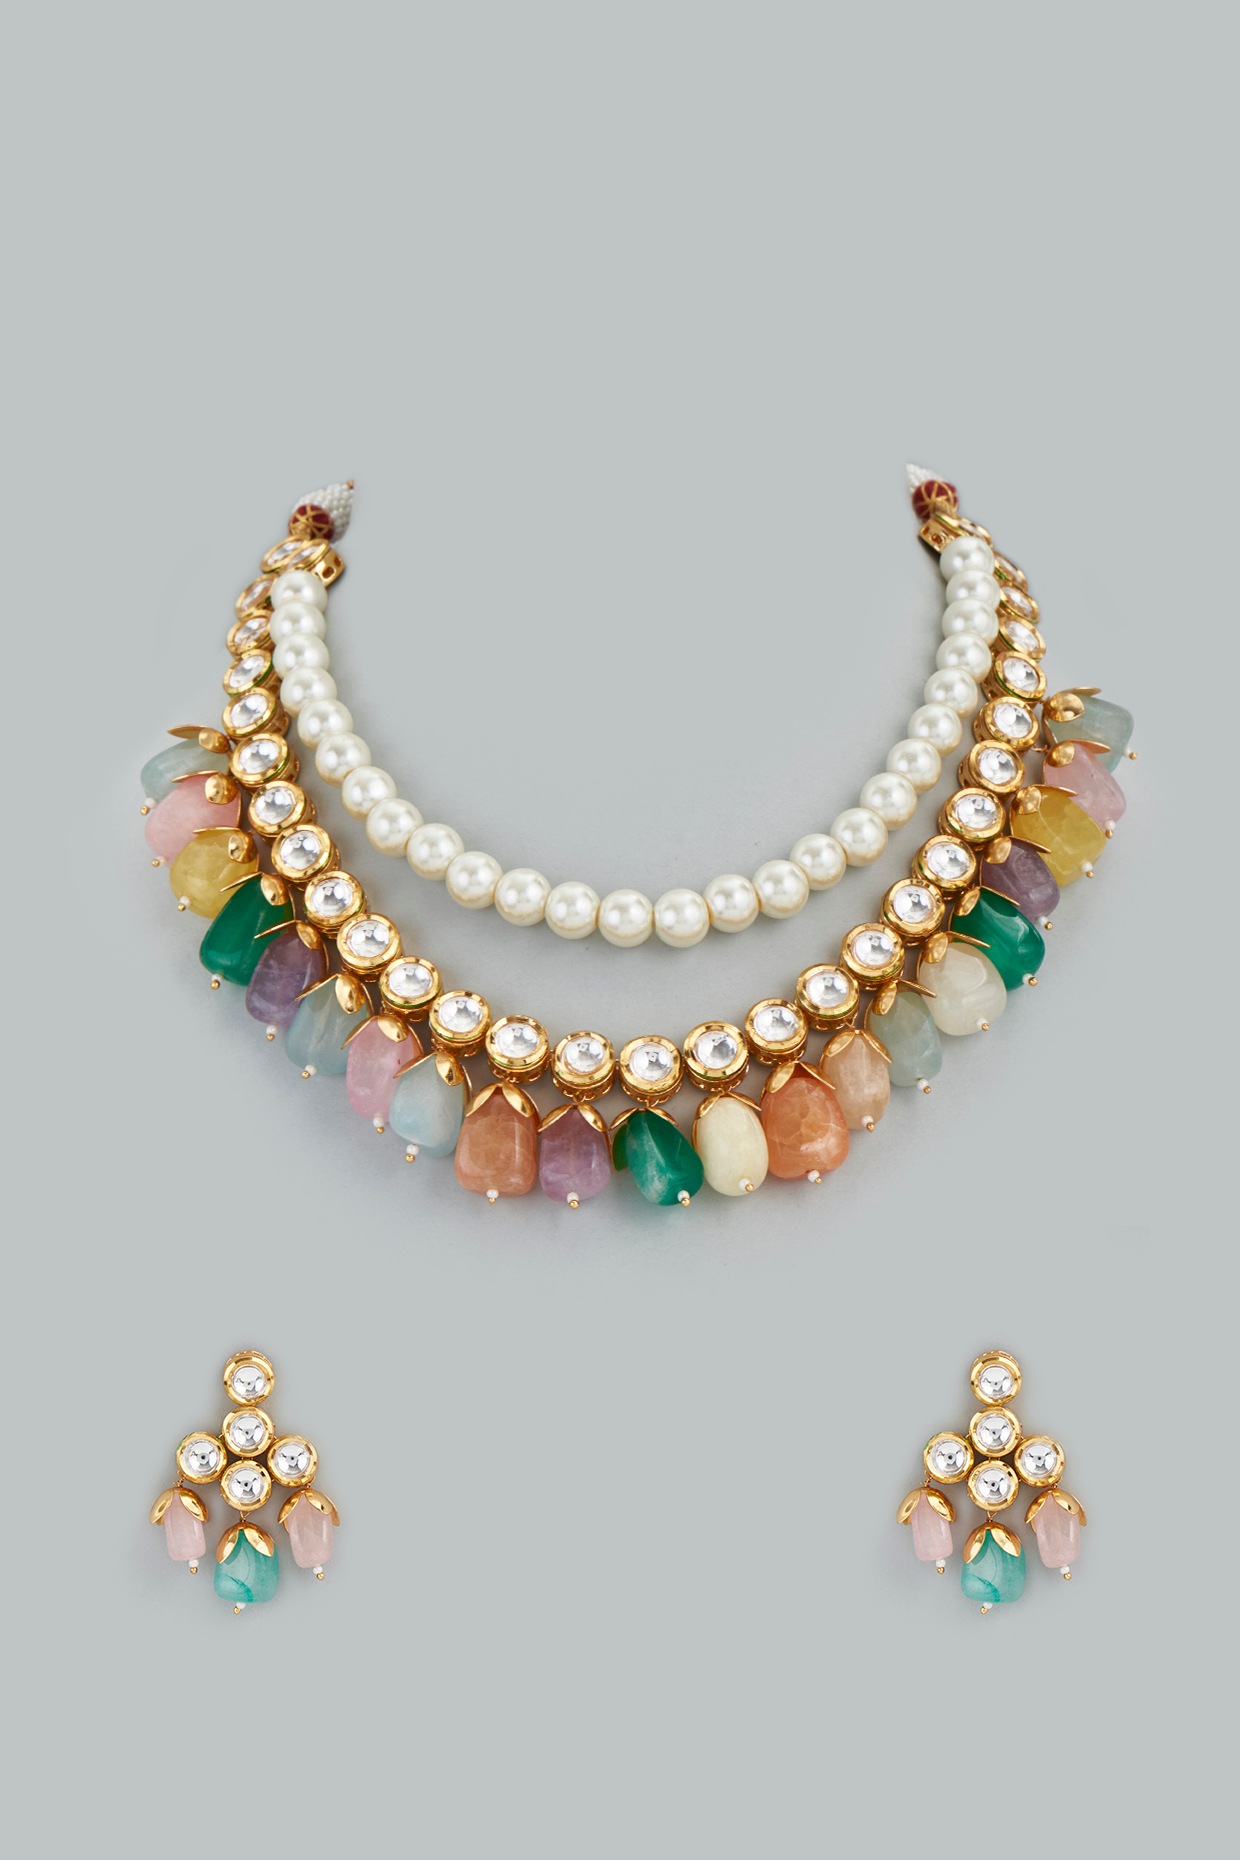 Kyoto Pearl | Hand Selected Pearl Jewellery